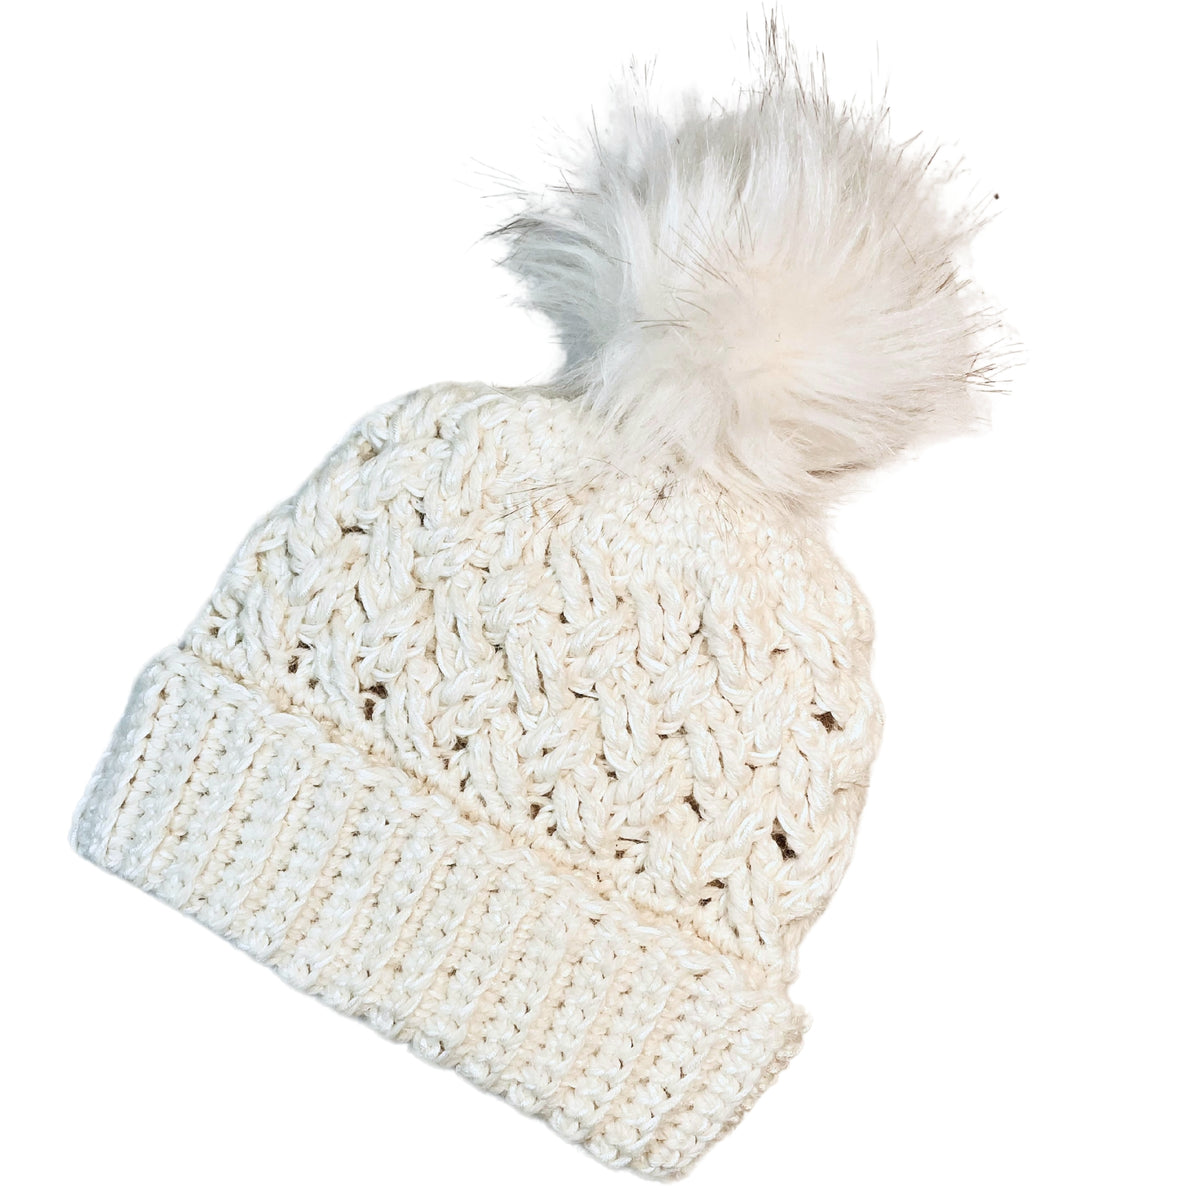 Natural white color cozy soft warm handmade knitted crochet celtic hat with a white pom pom made in Montana by Alpacas of Montana.